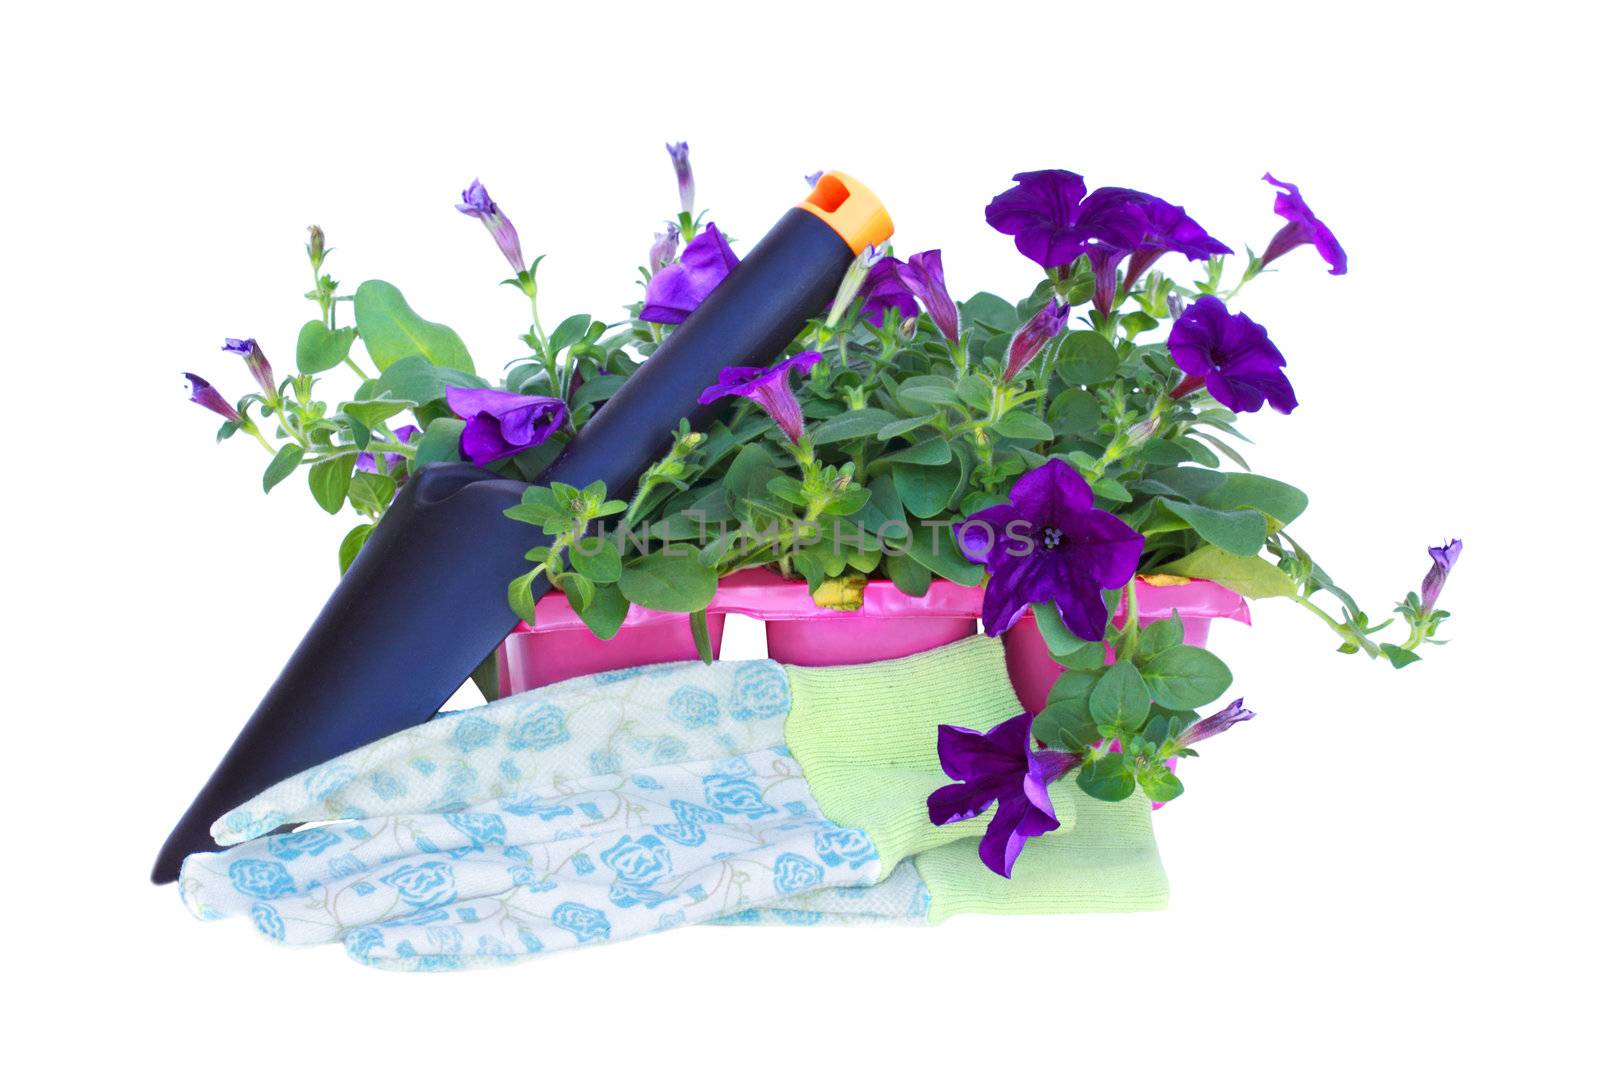 Pack of petunias with trowel and gardening gloves isolated on a white background.